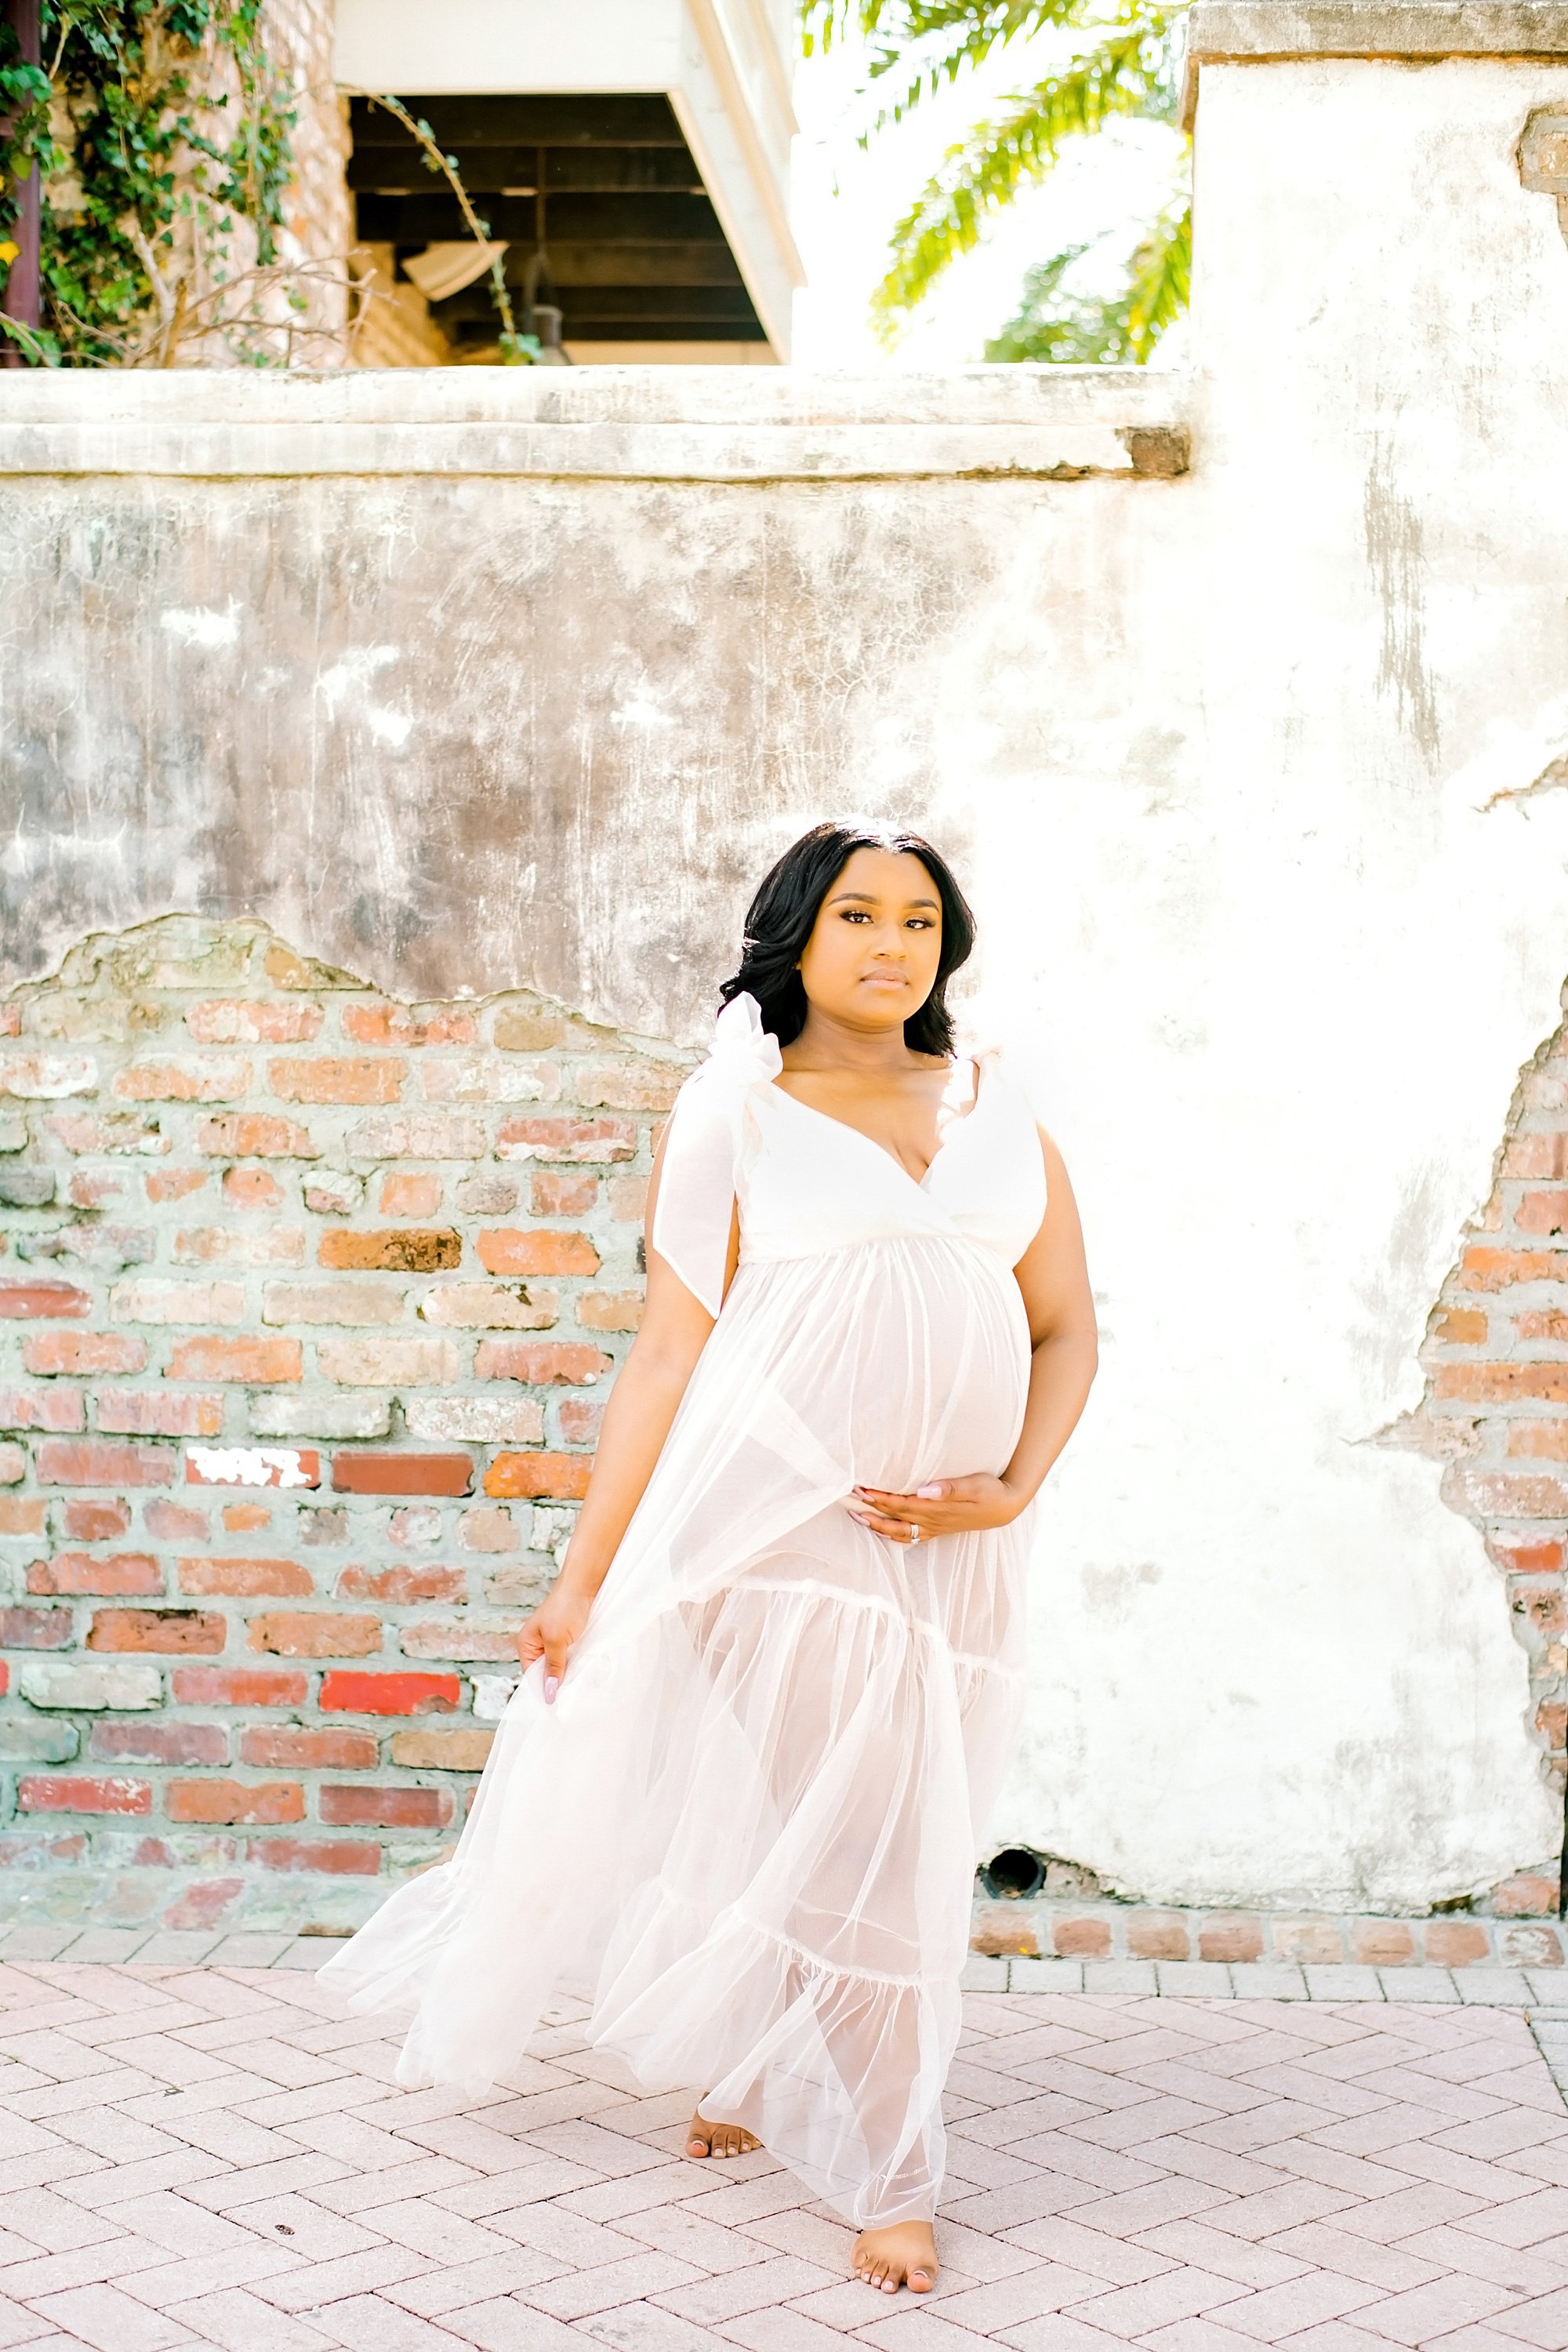 French Quarter Engagement Shoot-New Orleans French Quarter-New Orleans Photographer_0690.jpg